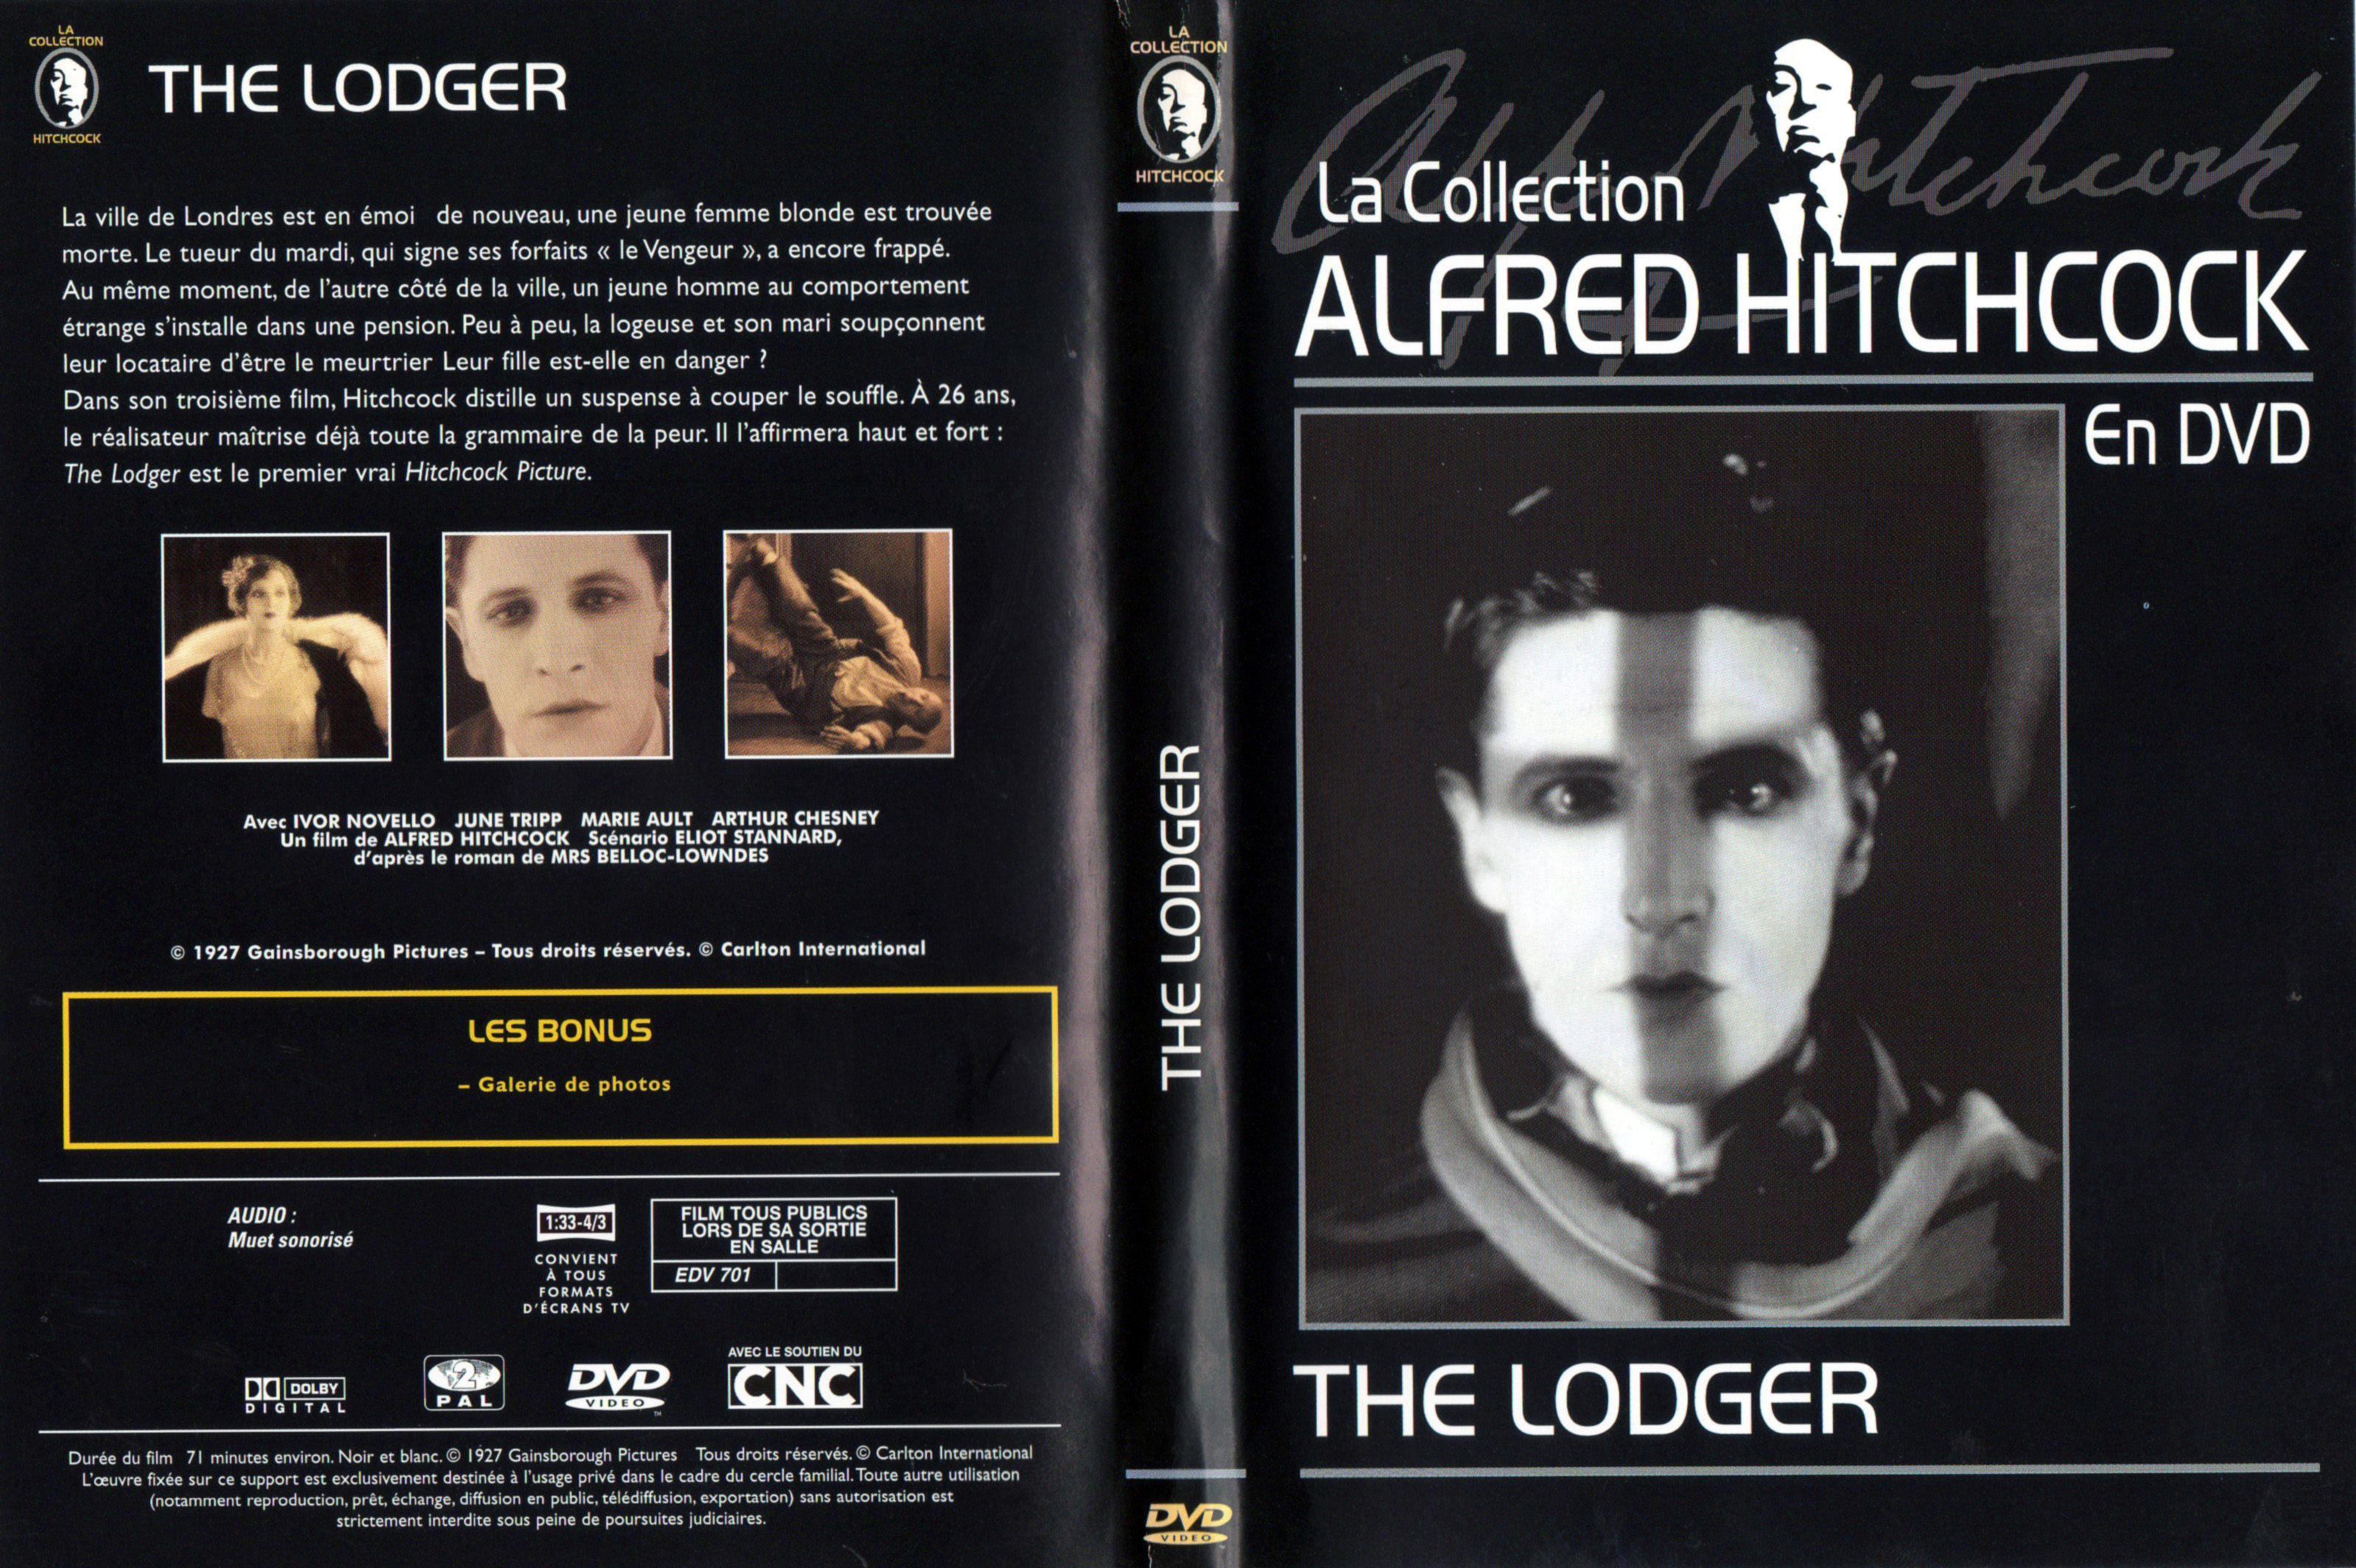 Jaquette DVD The lodger